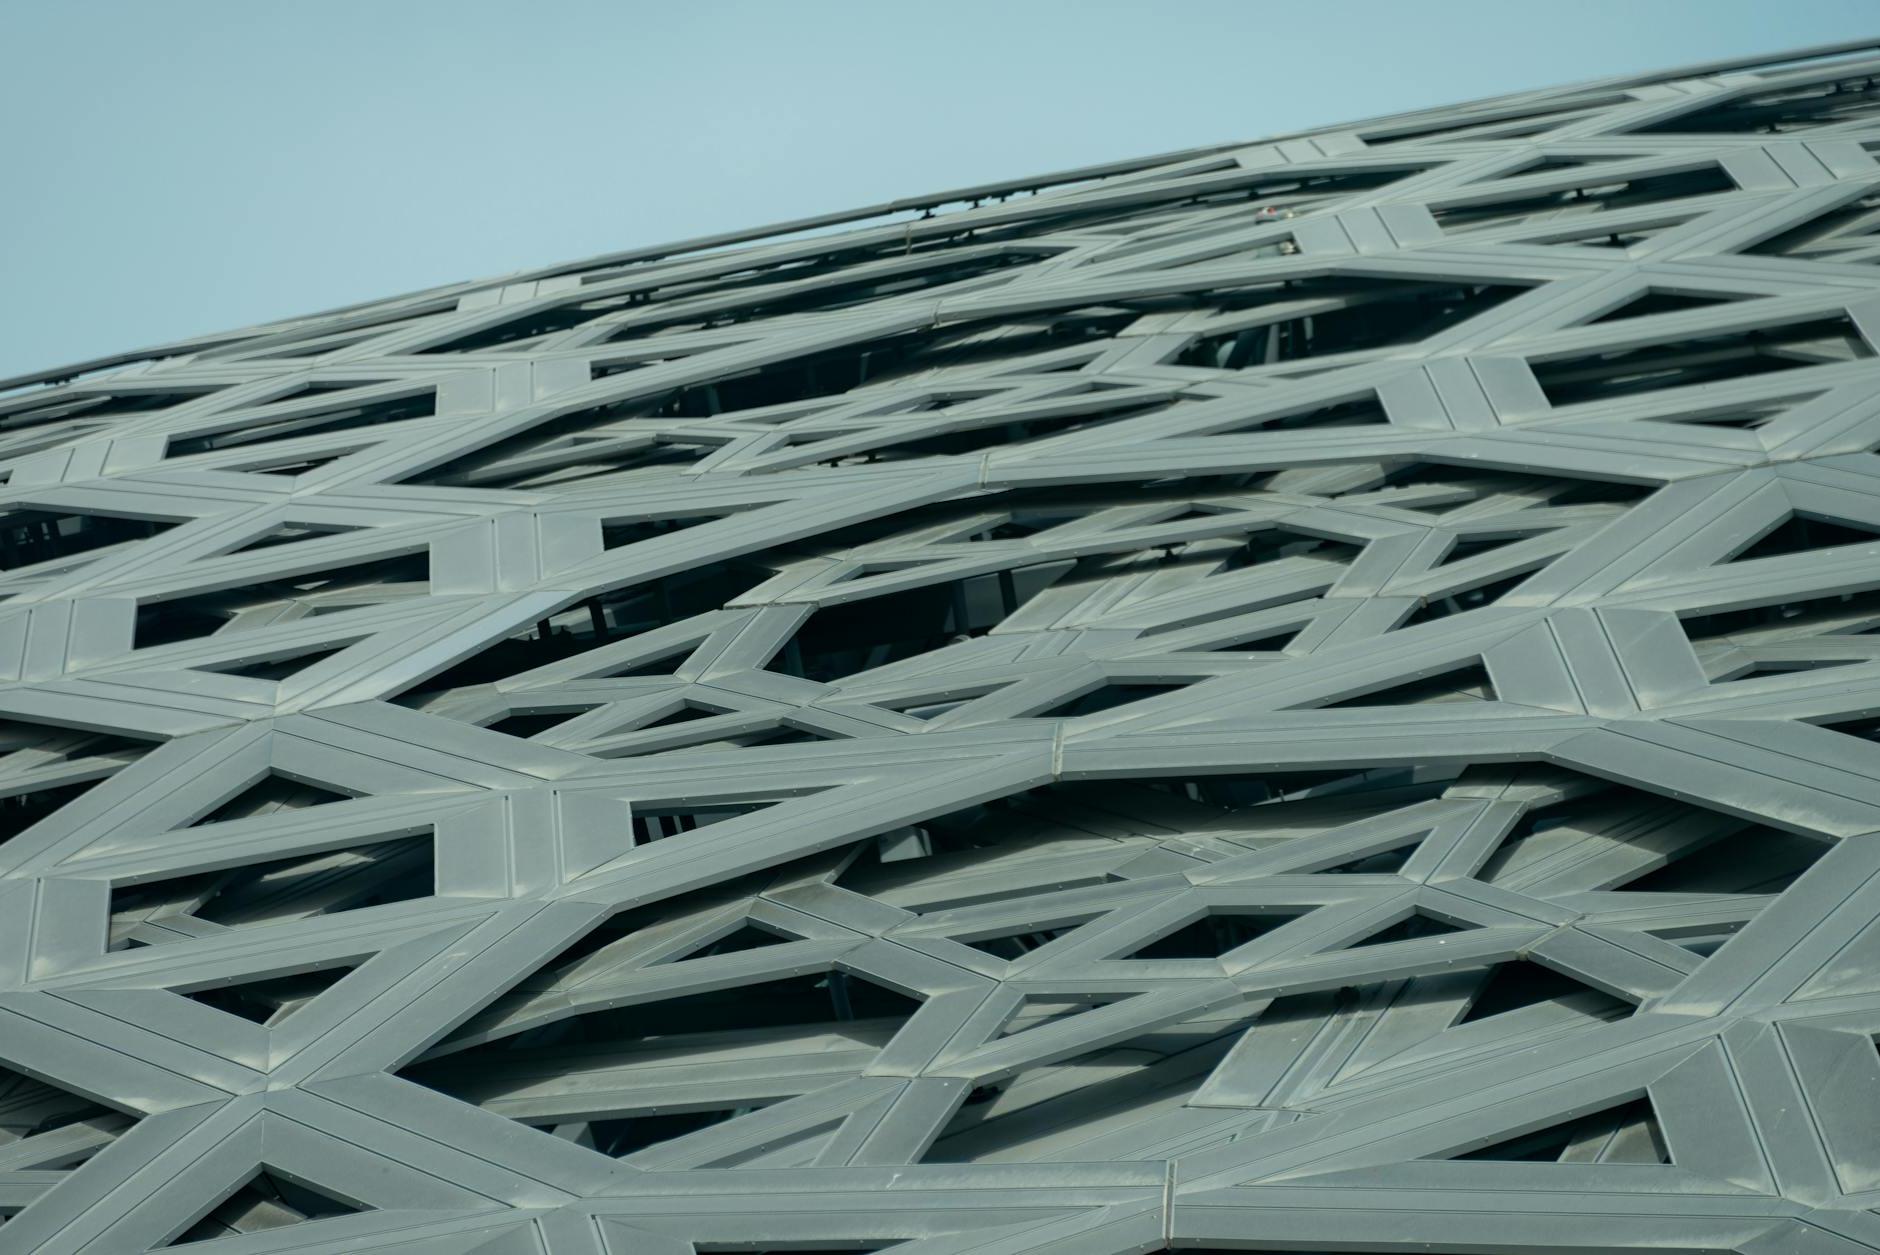 Abu Dhabi Louvre Museum Steel Dome Roofing